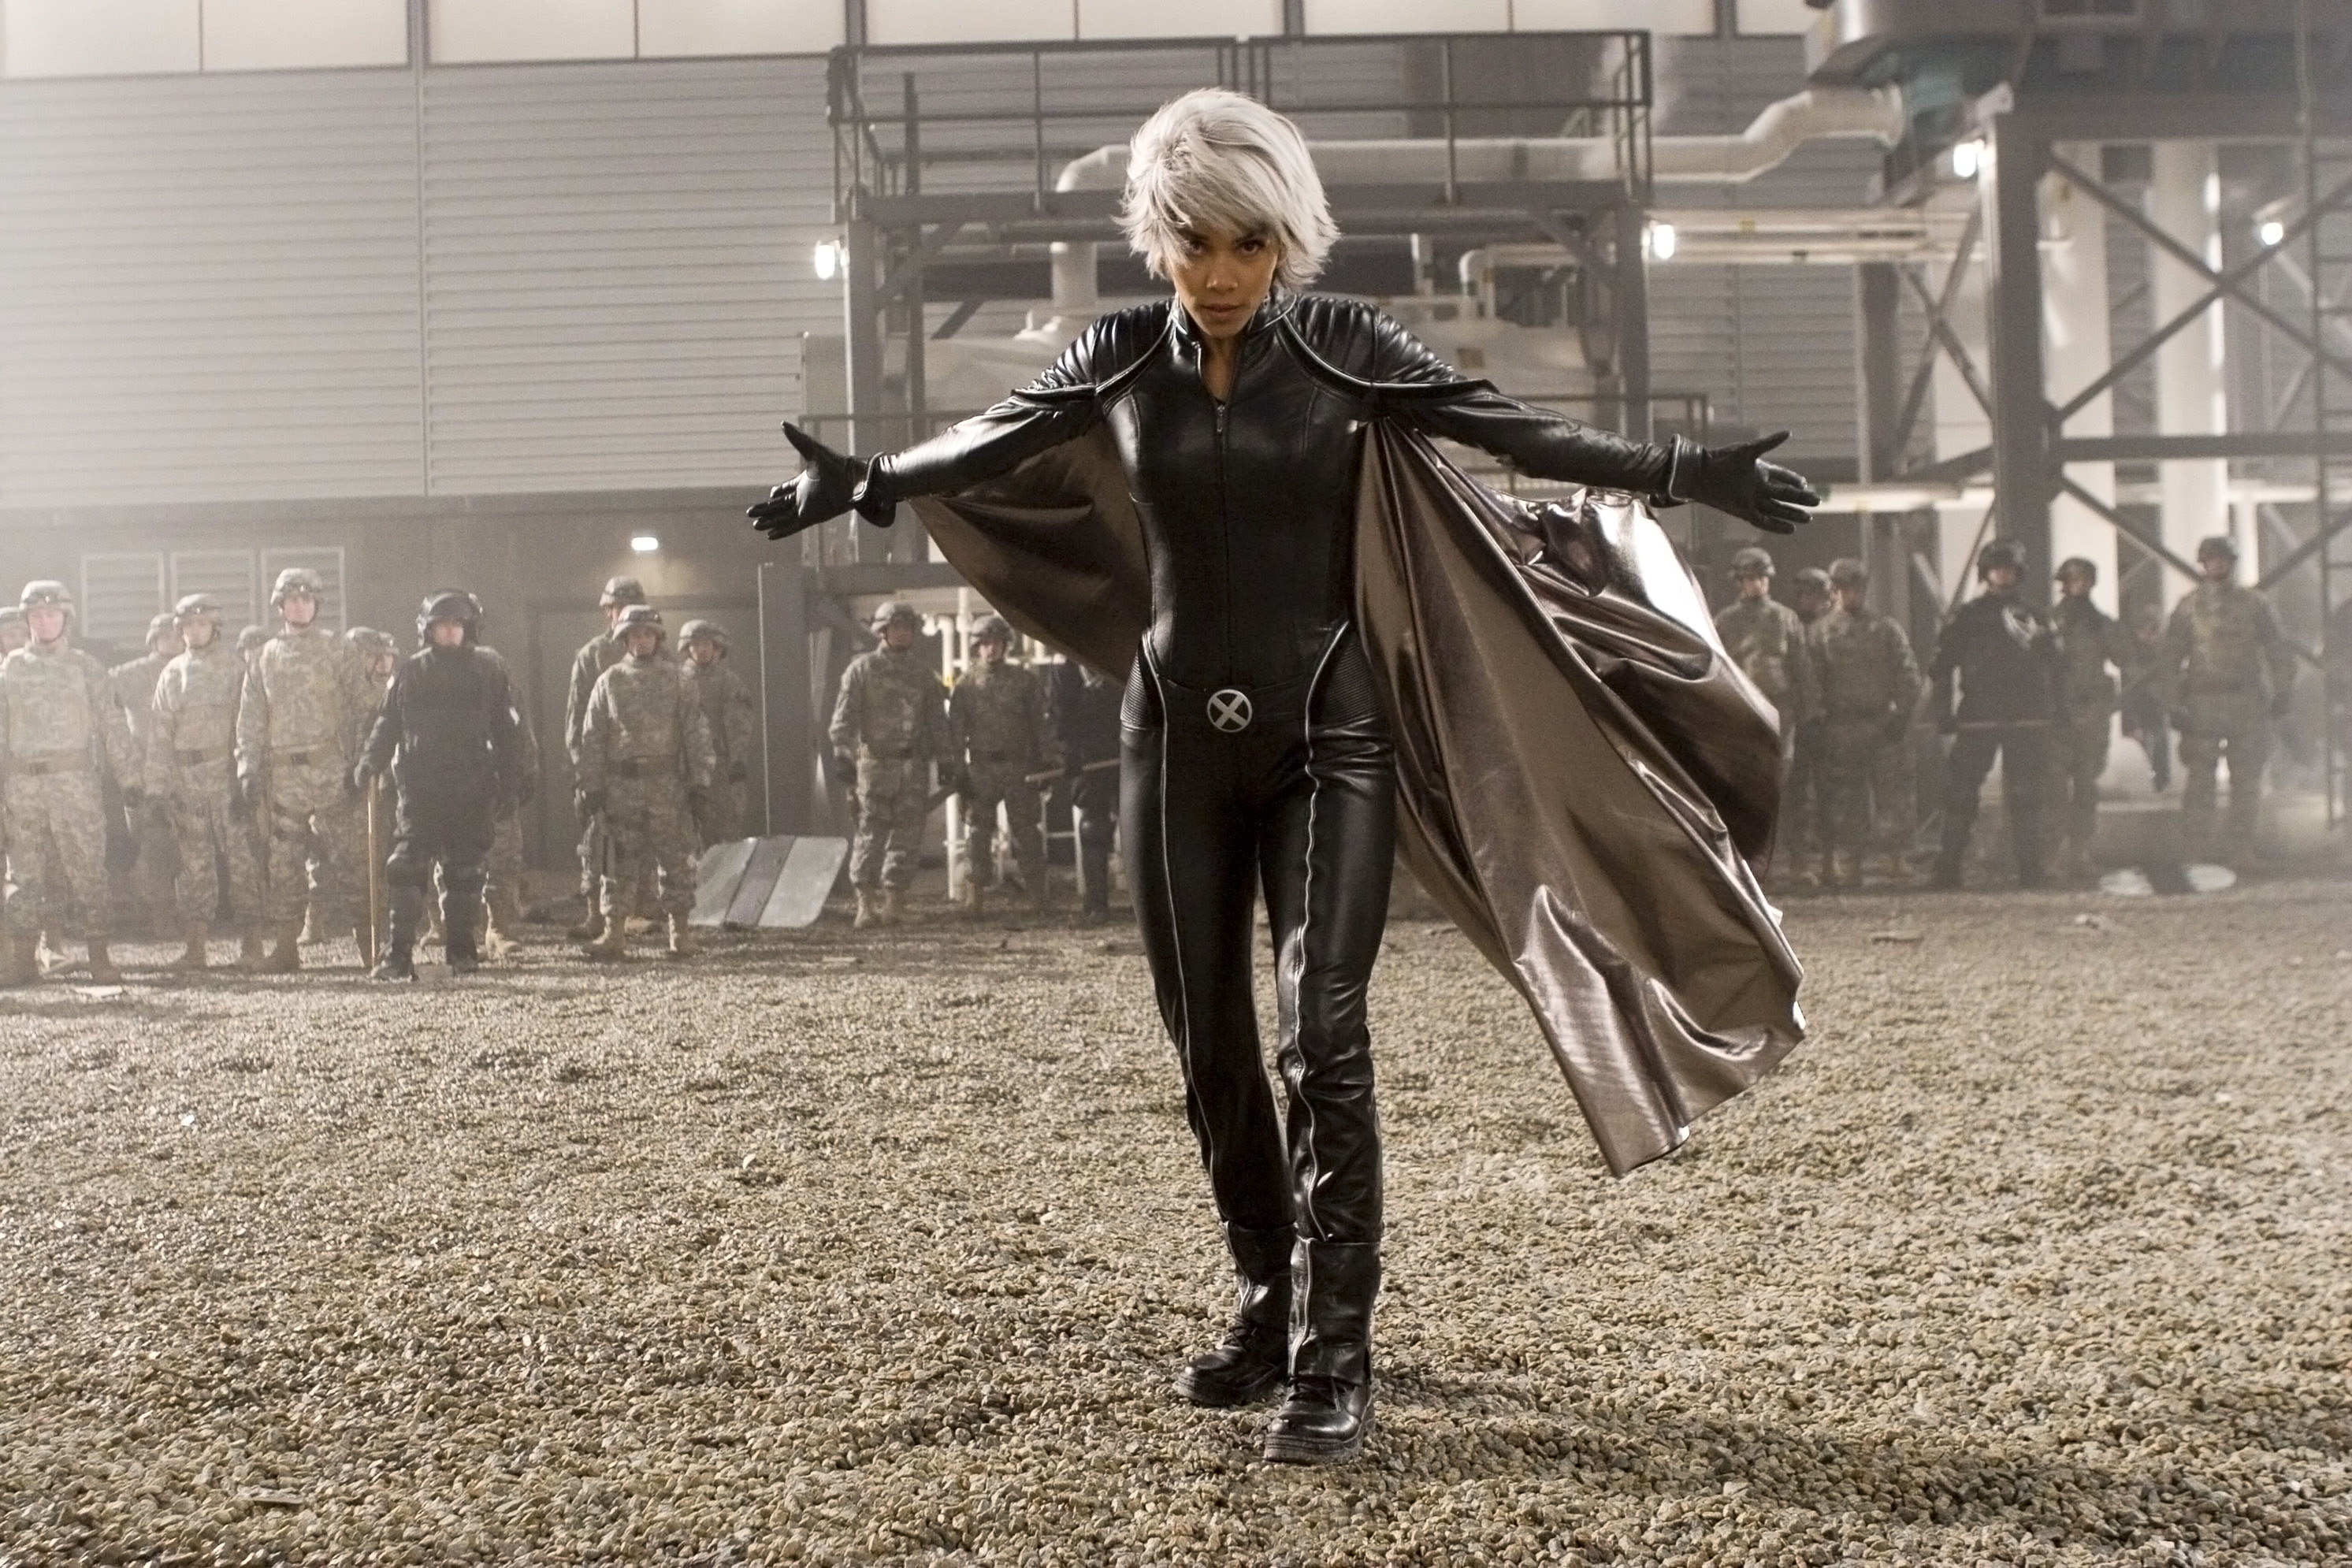 Storm gets ready to fight